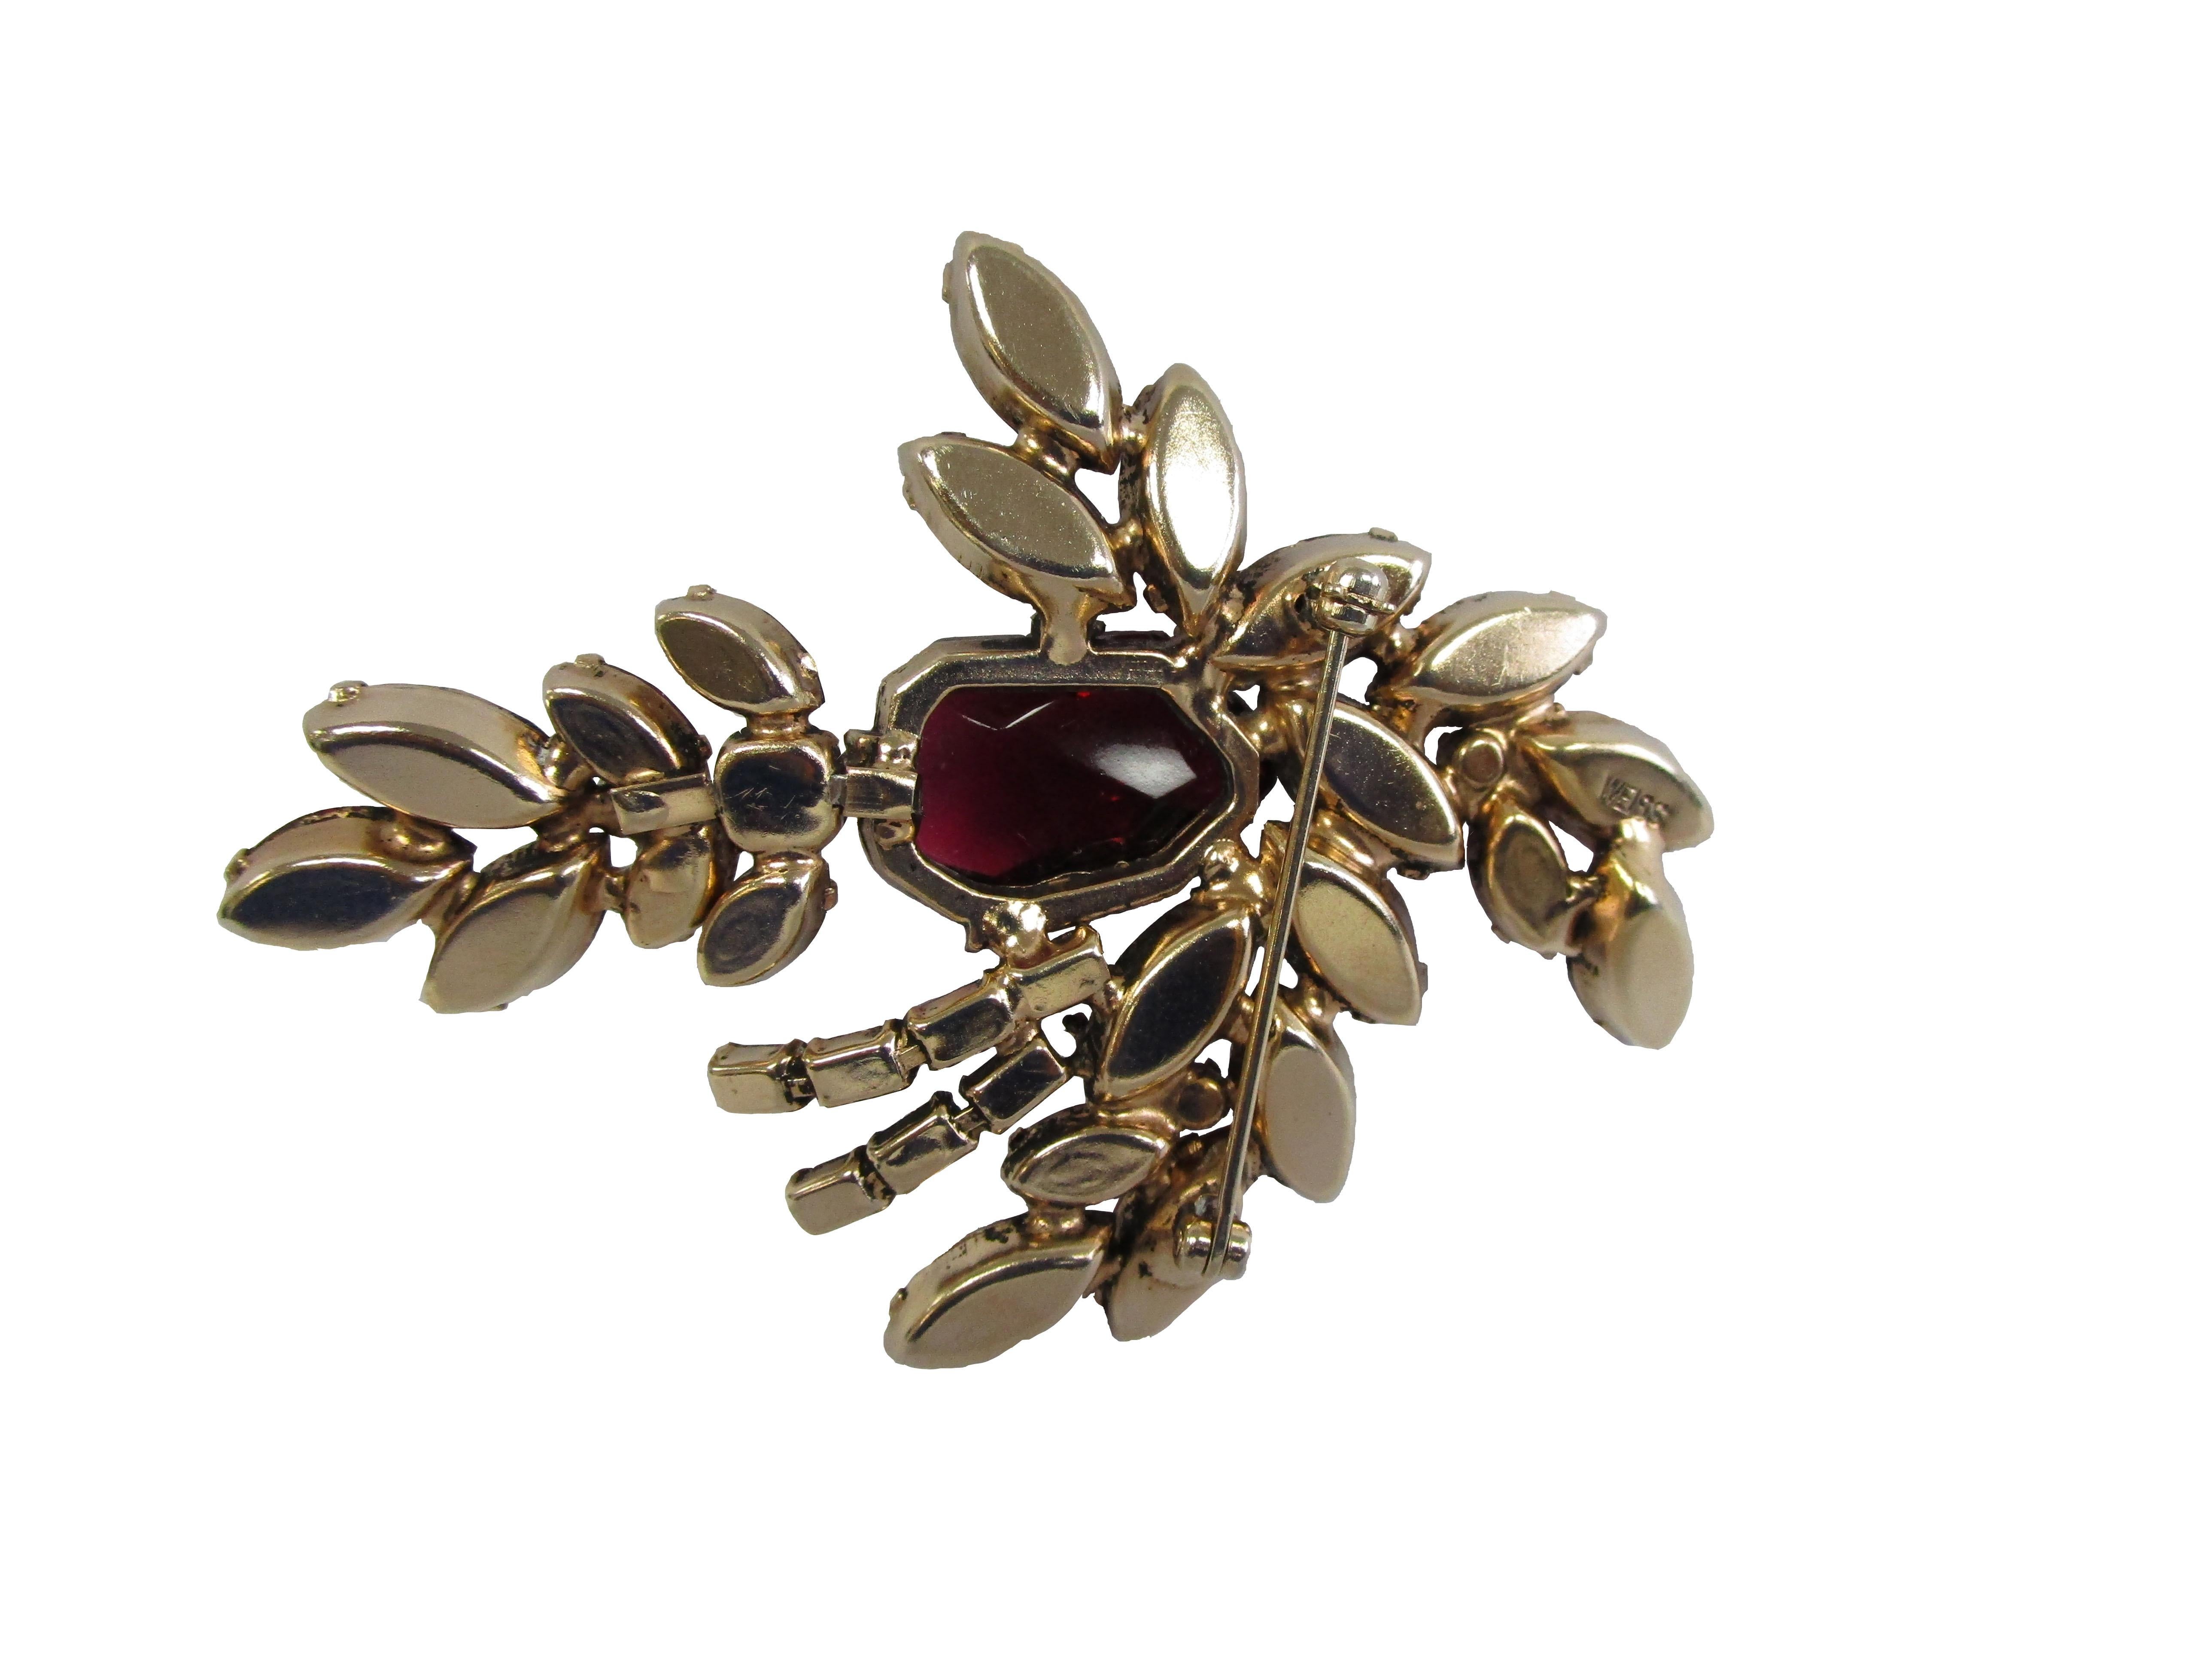 1960's Weiss  Festive Multicolored Cluster Gem Evening Brooch

Vibrantly colorful brooch from Weiss!
This brooch features an explosion of gems clusters centered by a intricately cut grape gem.
The bottom of the brooch is a adorned with a jeweled